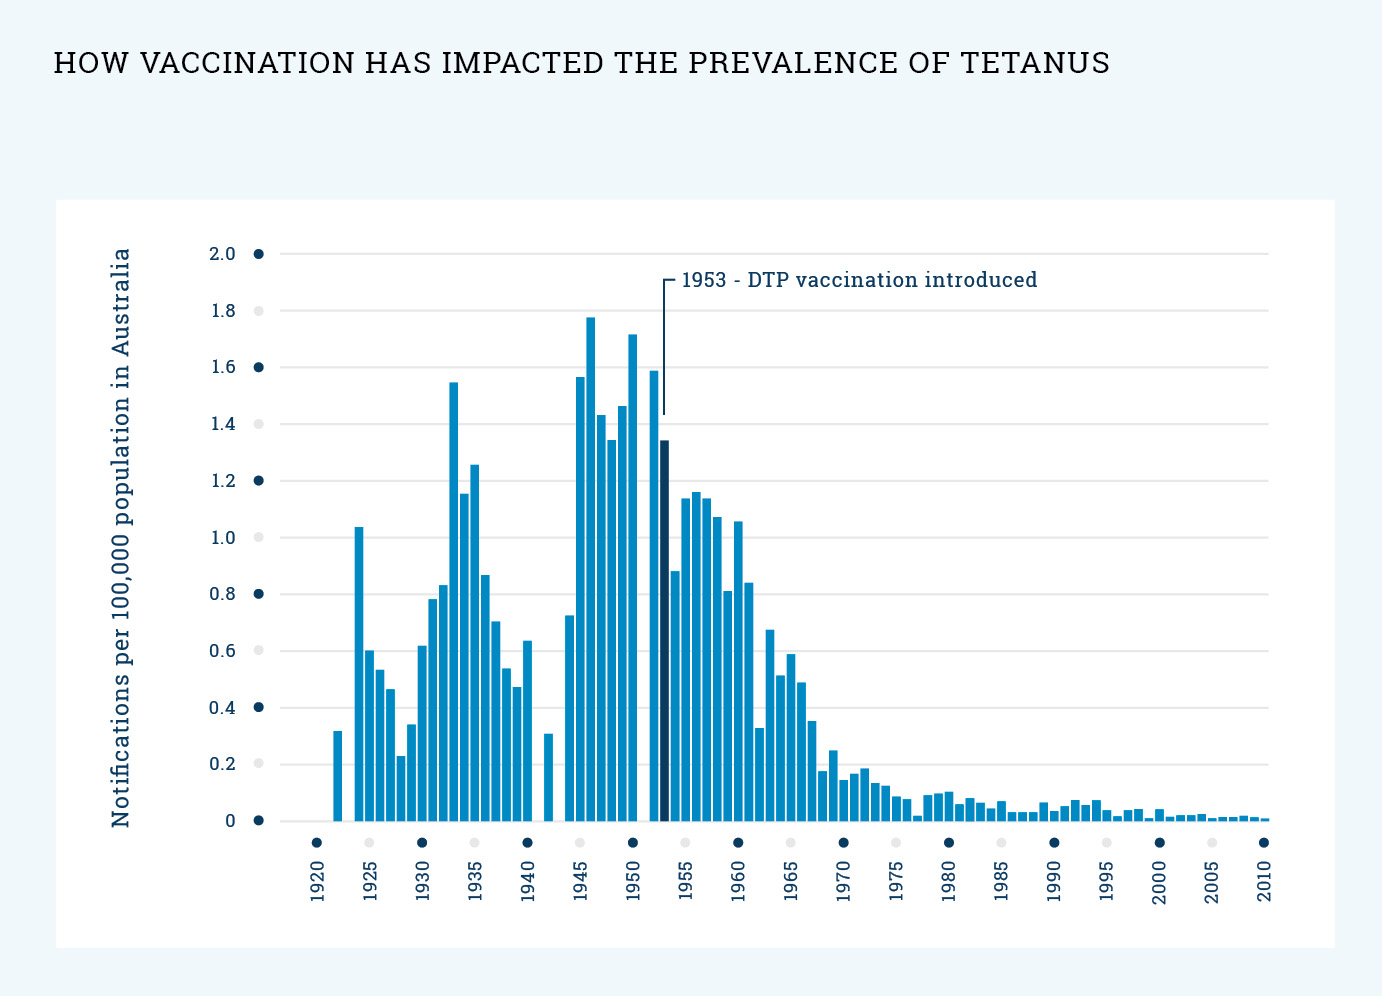 graph: What impact has vaccination had on the prevalence of tetanus?